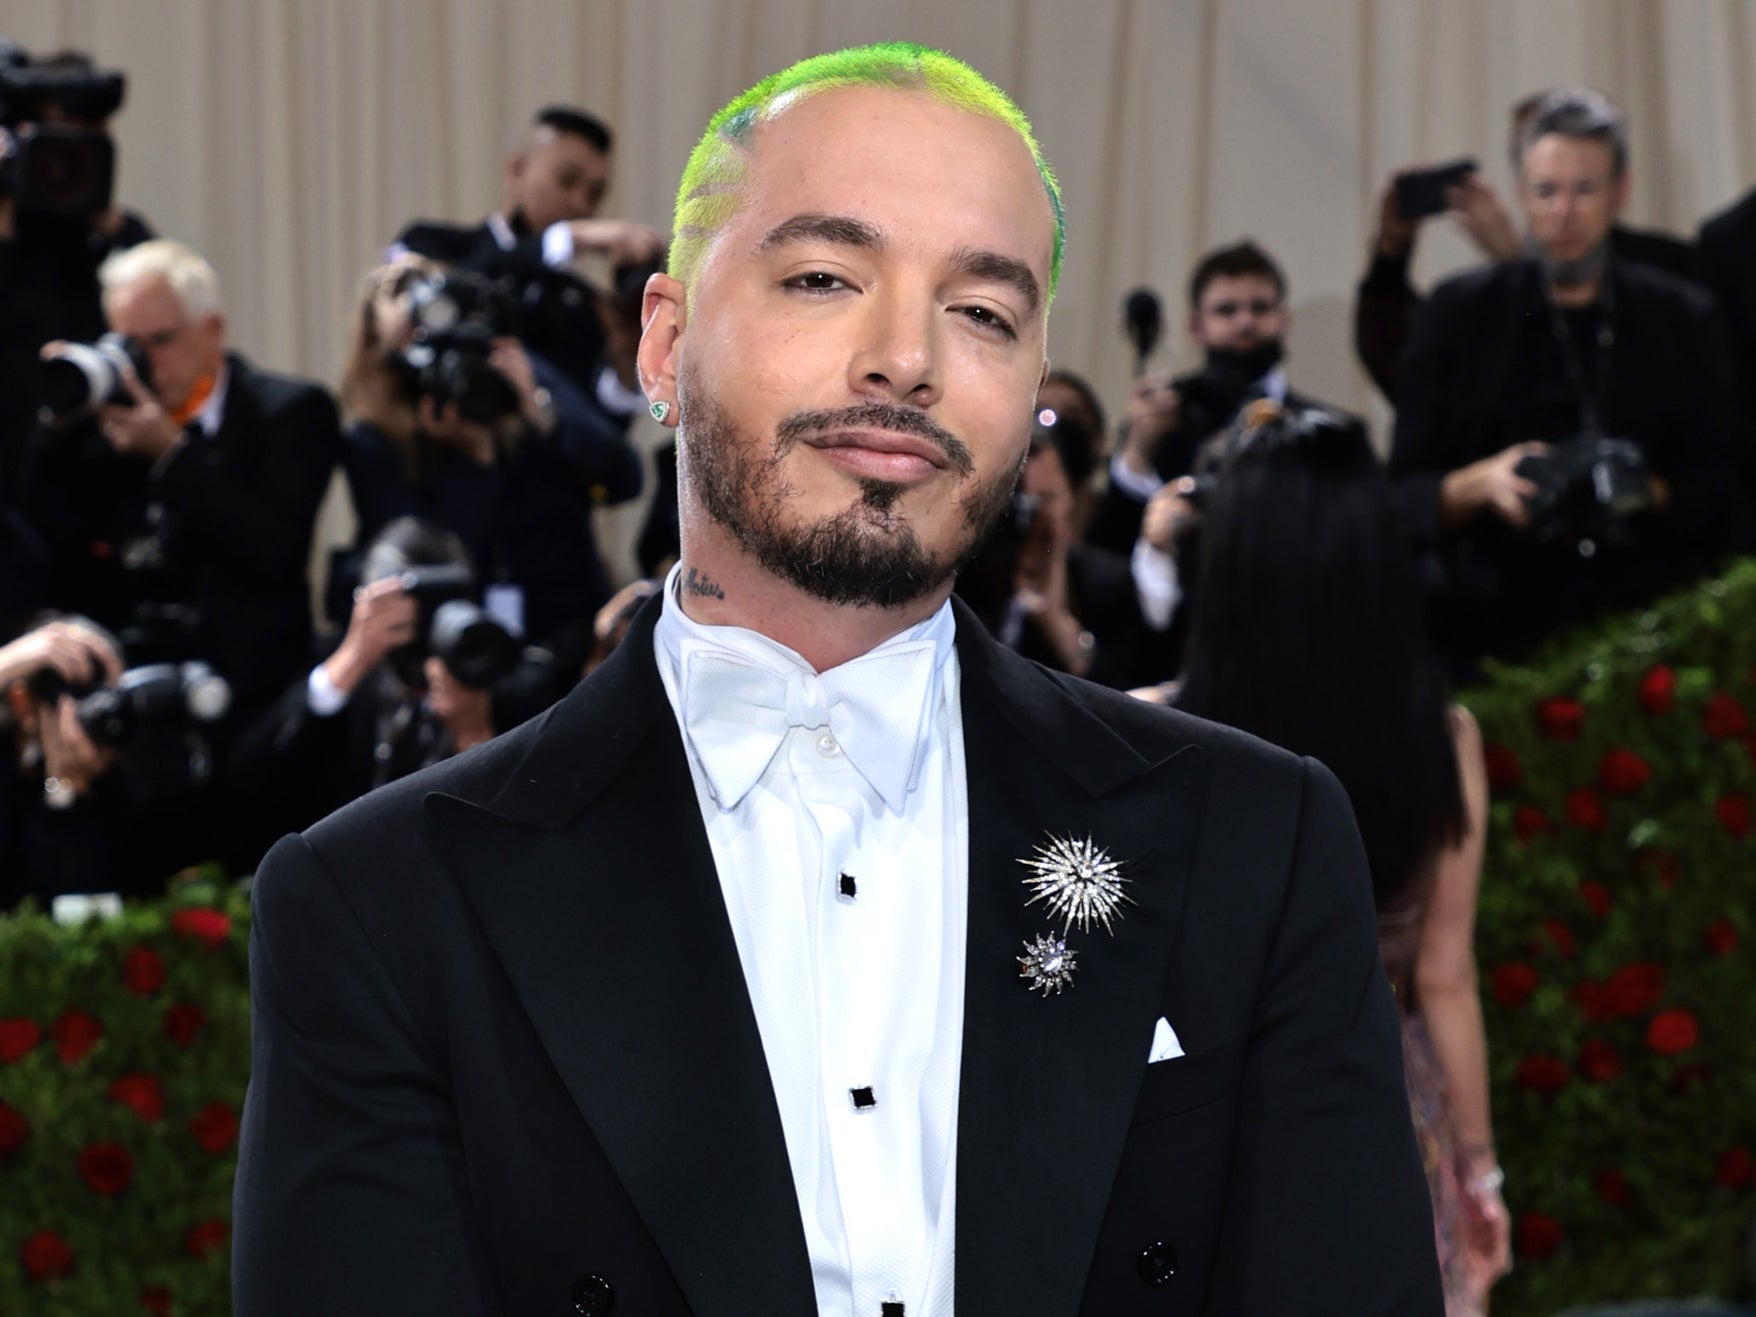 Balvin pictured at the Met Gala in New York City, 2022